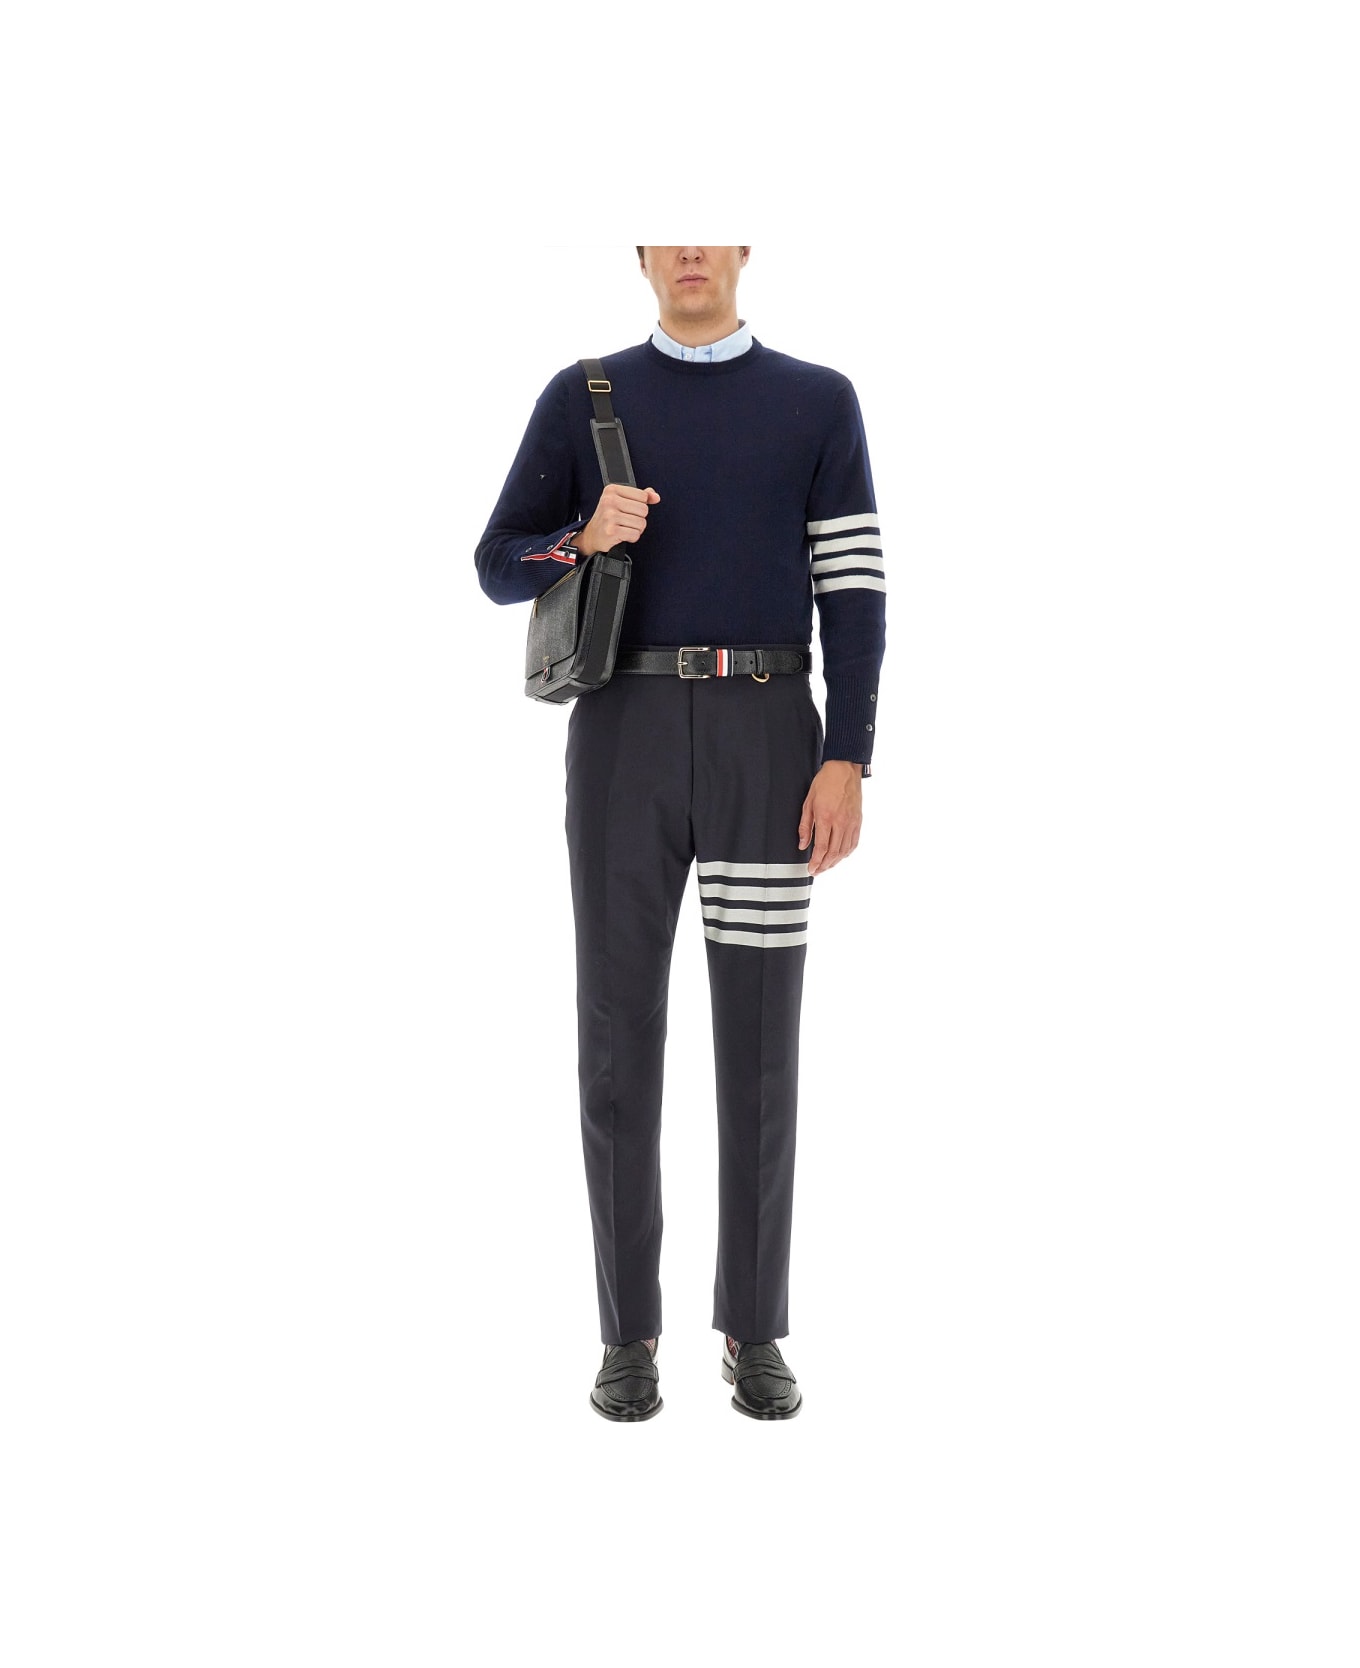 Thom Browne Cashmere Sweater - NAVY